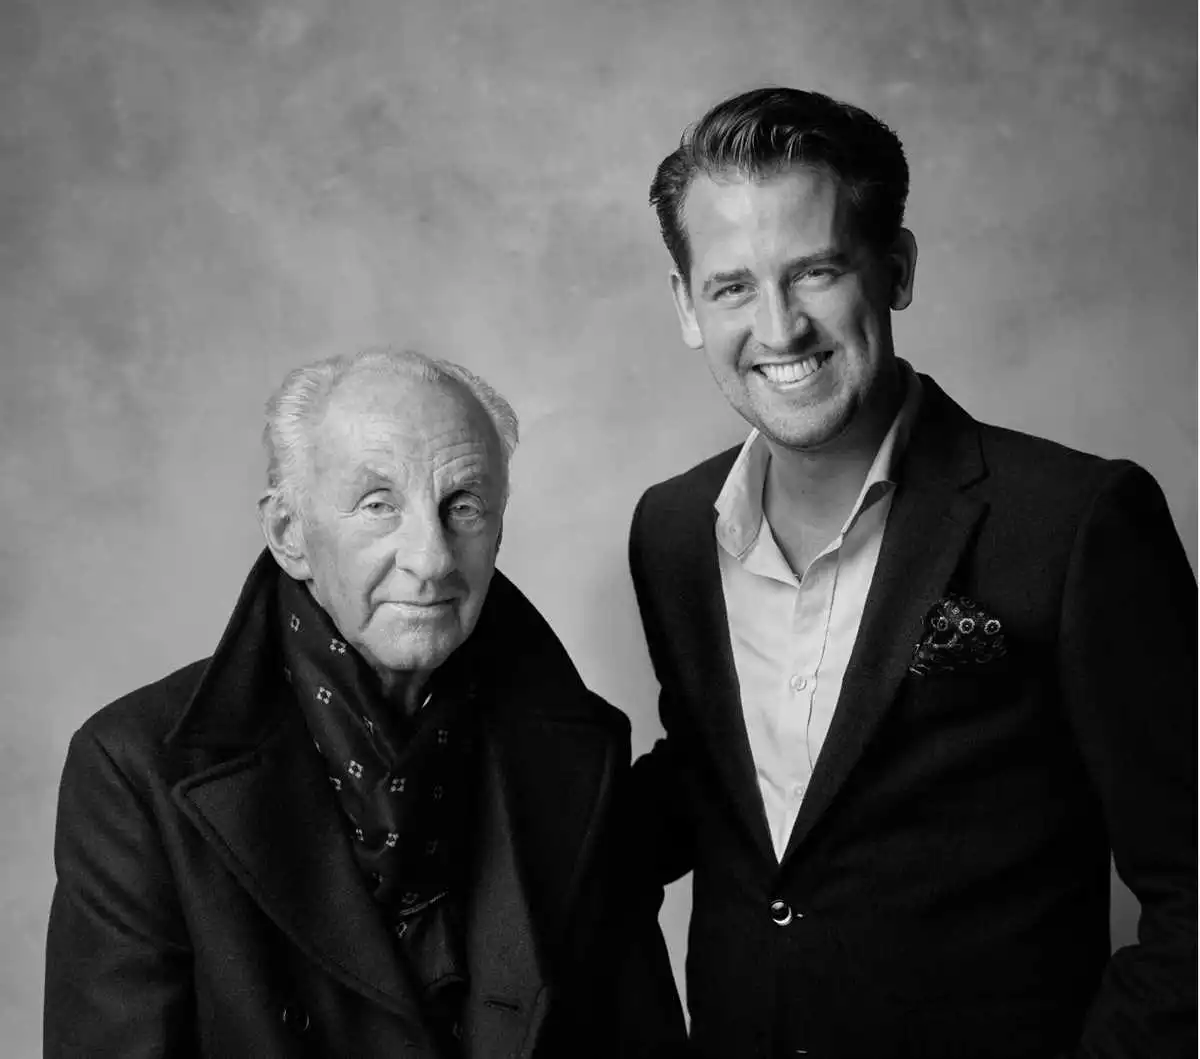 PAUL COSTELLOE TO OPEN 40TH ANNIVERSARY OF LONDON FASHION WEEK AT THE LINDLEY HALL  